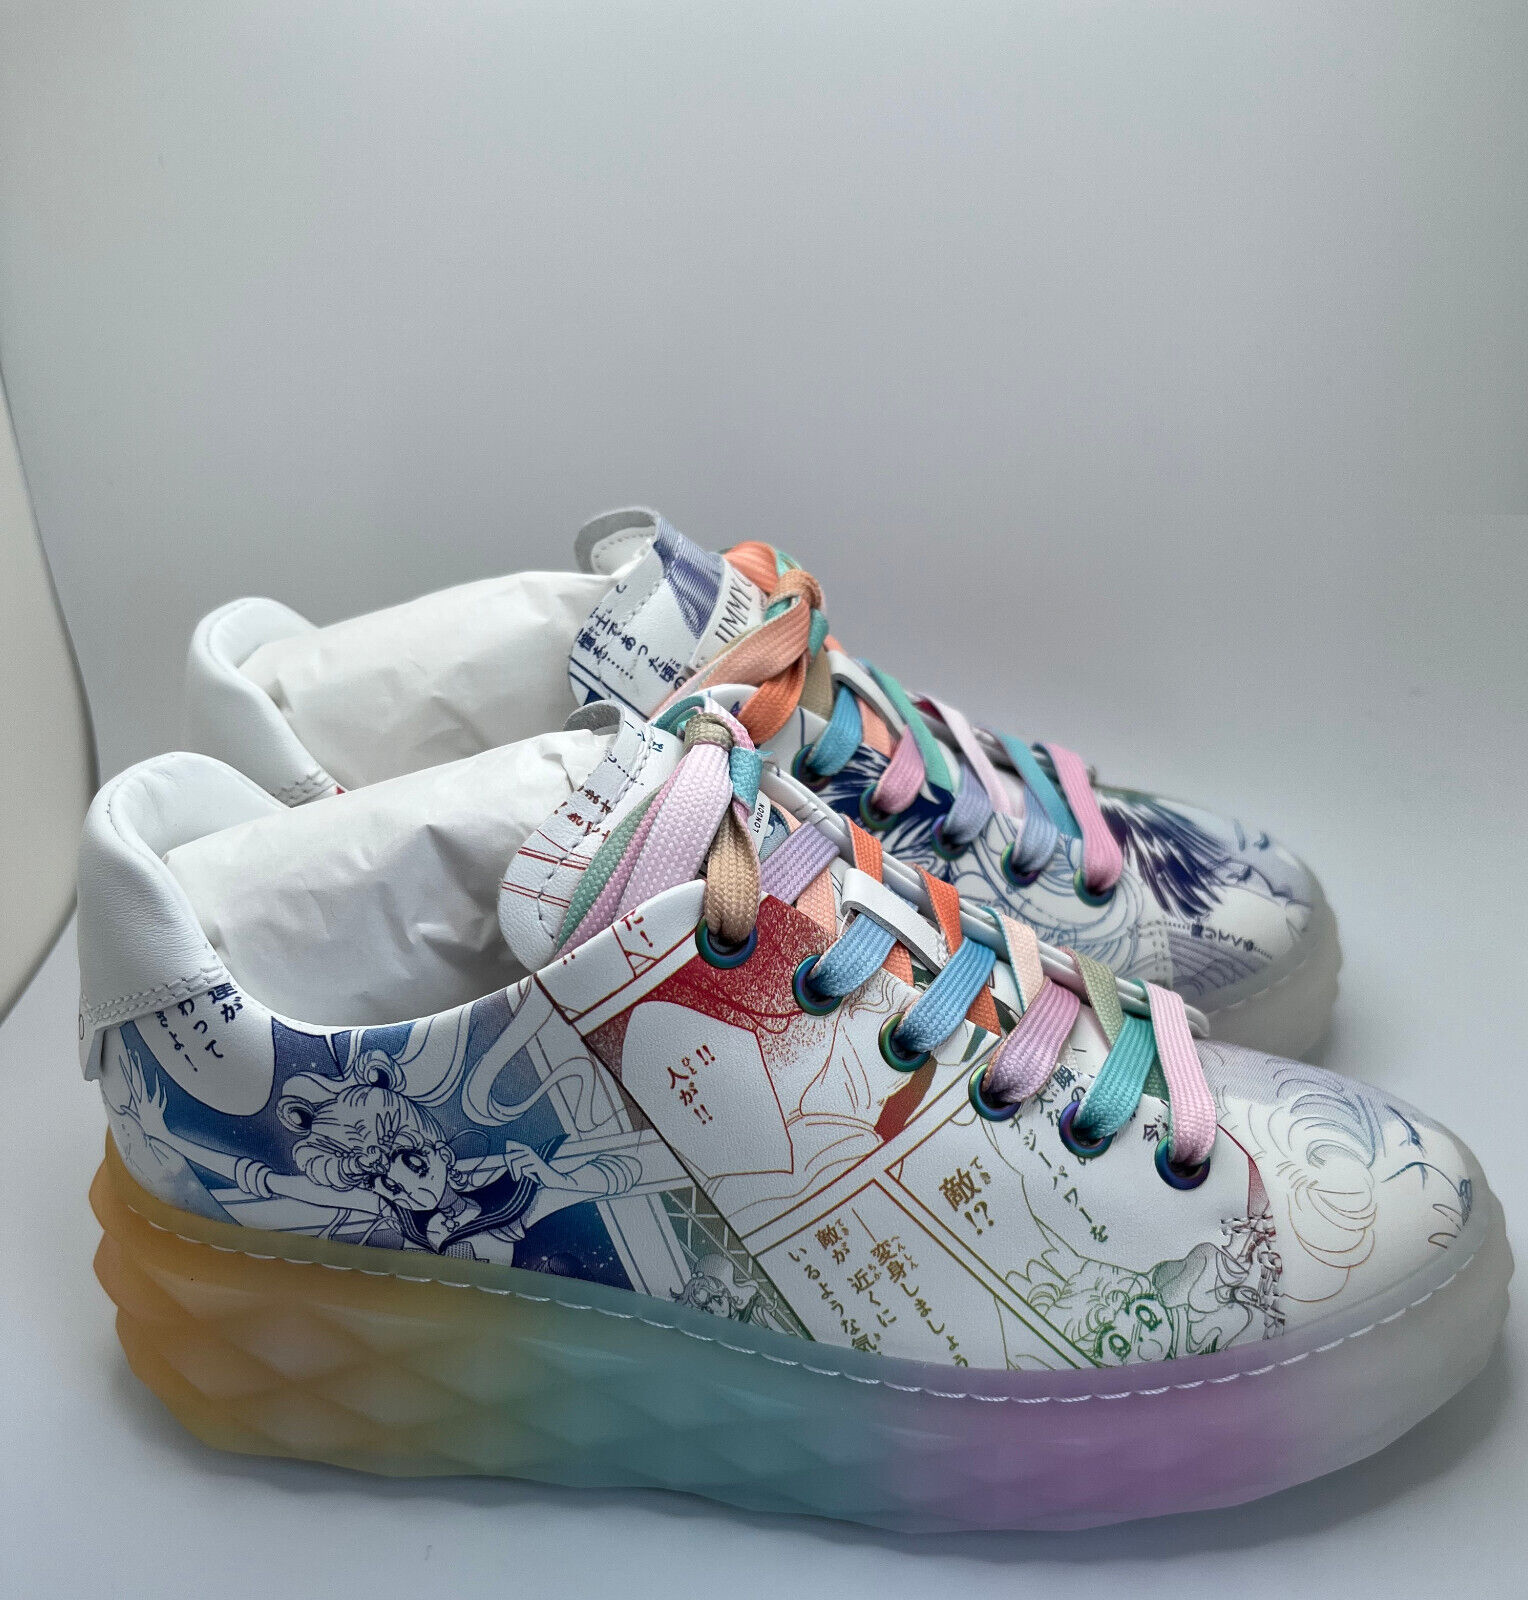 JIMMY CHOO Sailor Moon Limited Sneakers Collage Diamond Light Maxi Shoes US  4